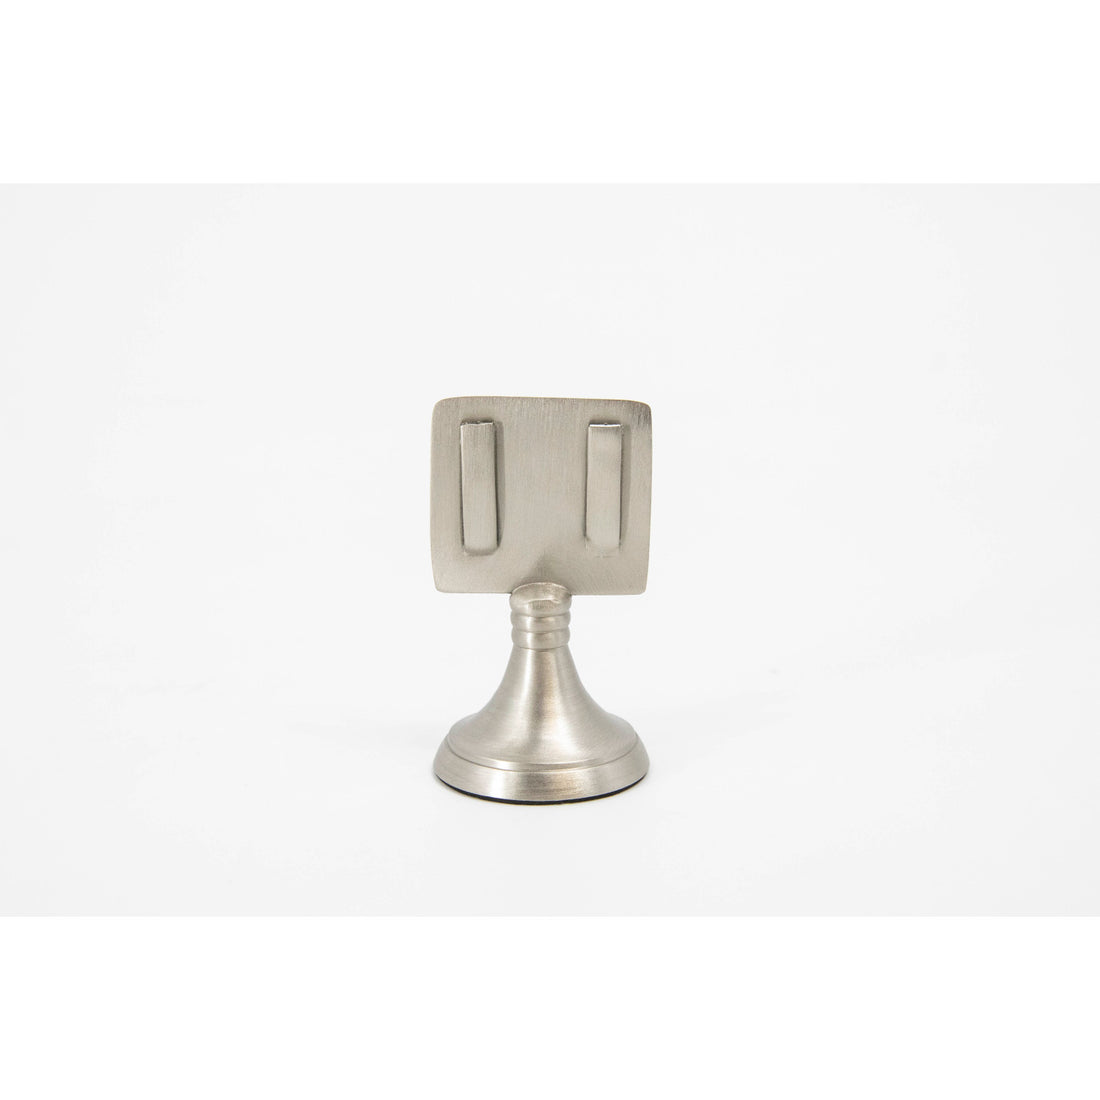 An elegant, silver, short round stand topped by a flat card-holder with two flat prongs, holding a place card reading &quot;Francis&quot;.